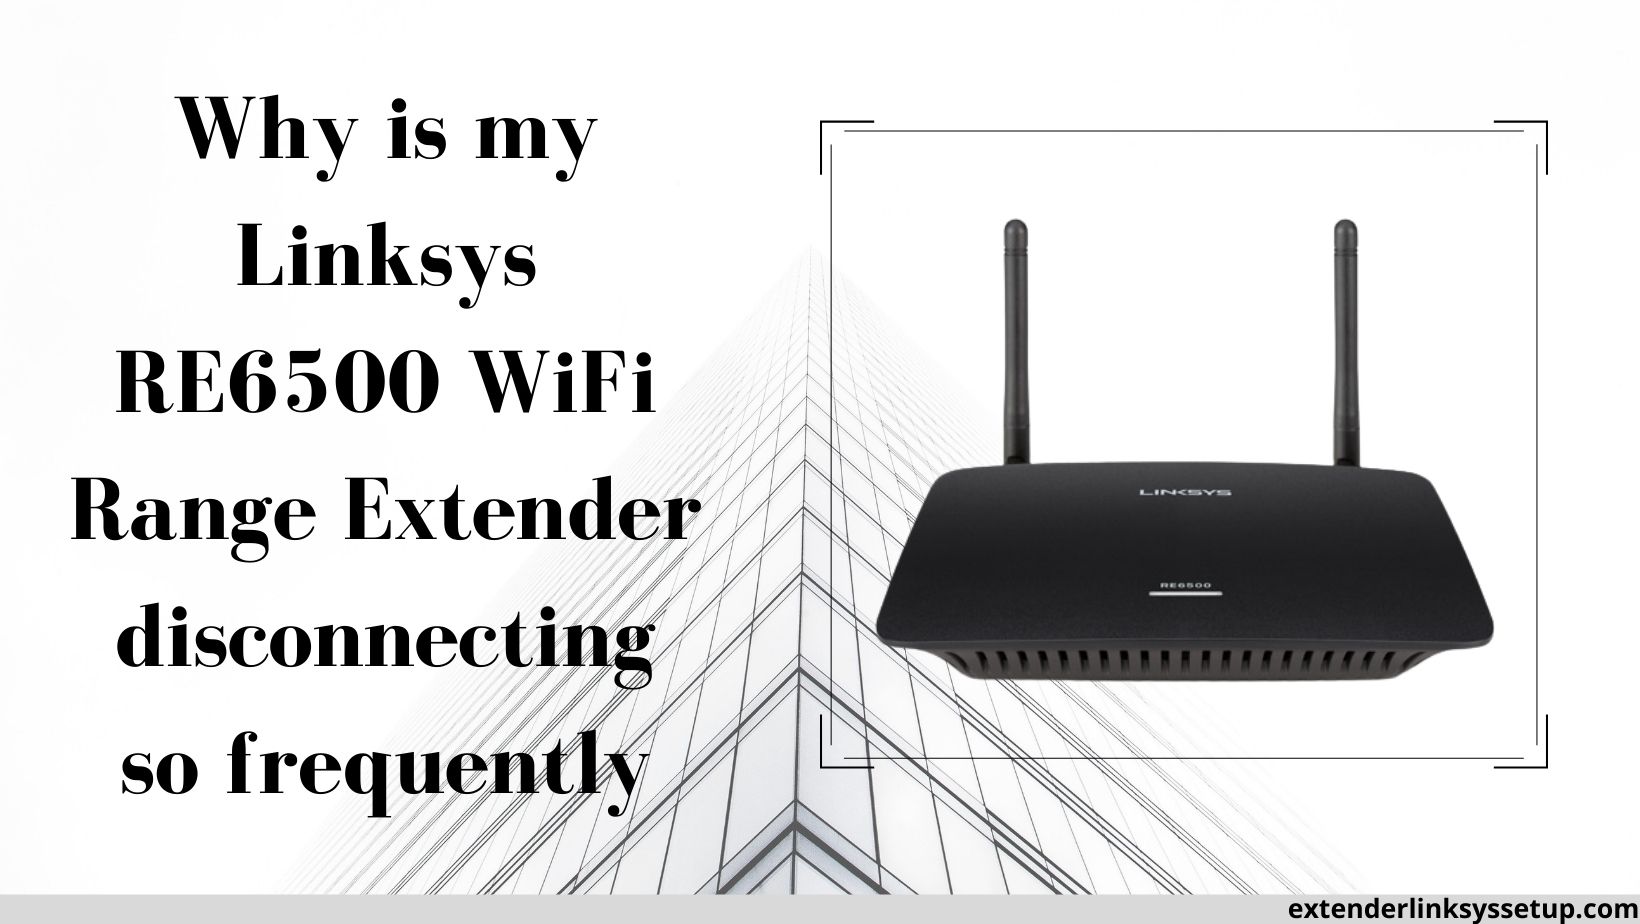 Why my Linksys RE6500 keep disconnecting? - Linksys Extender Setup